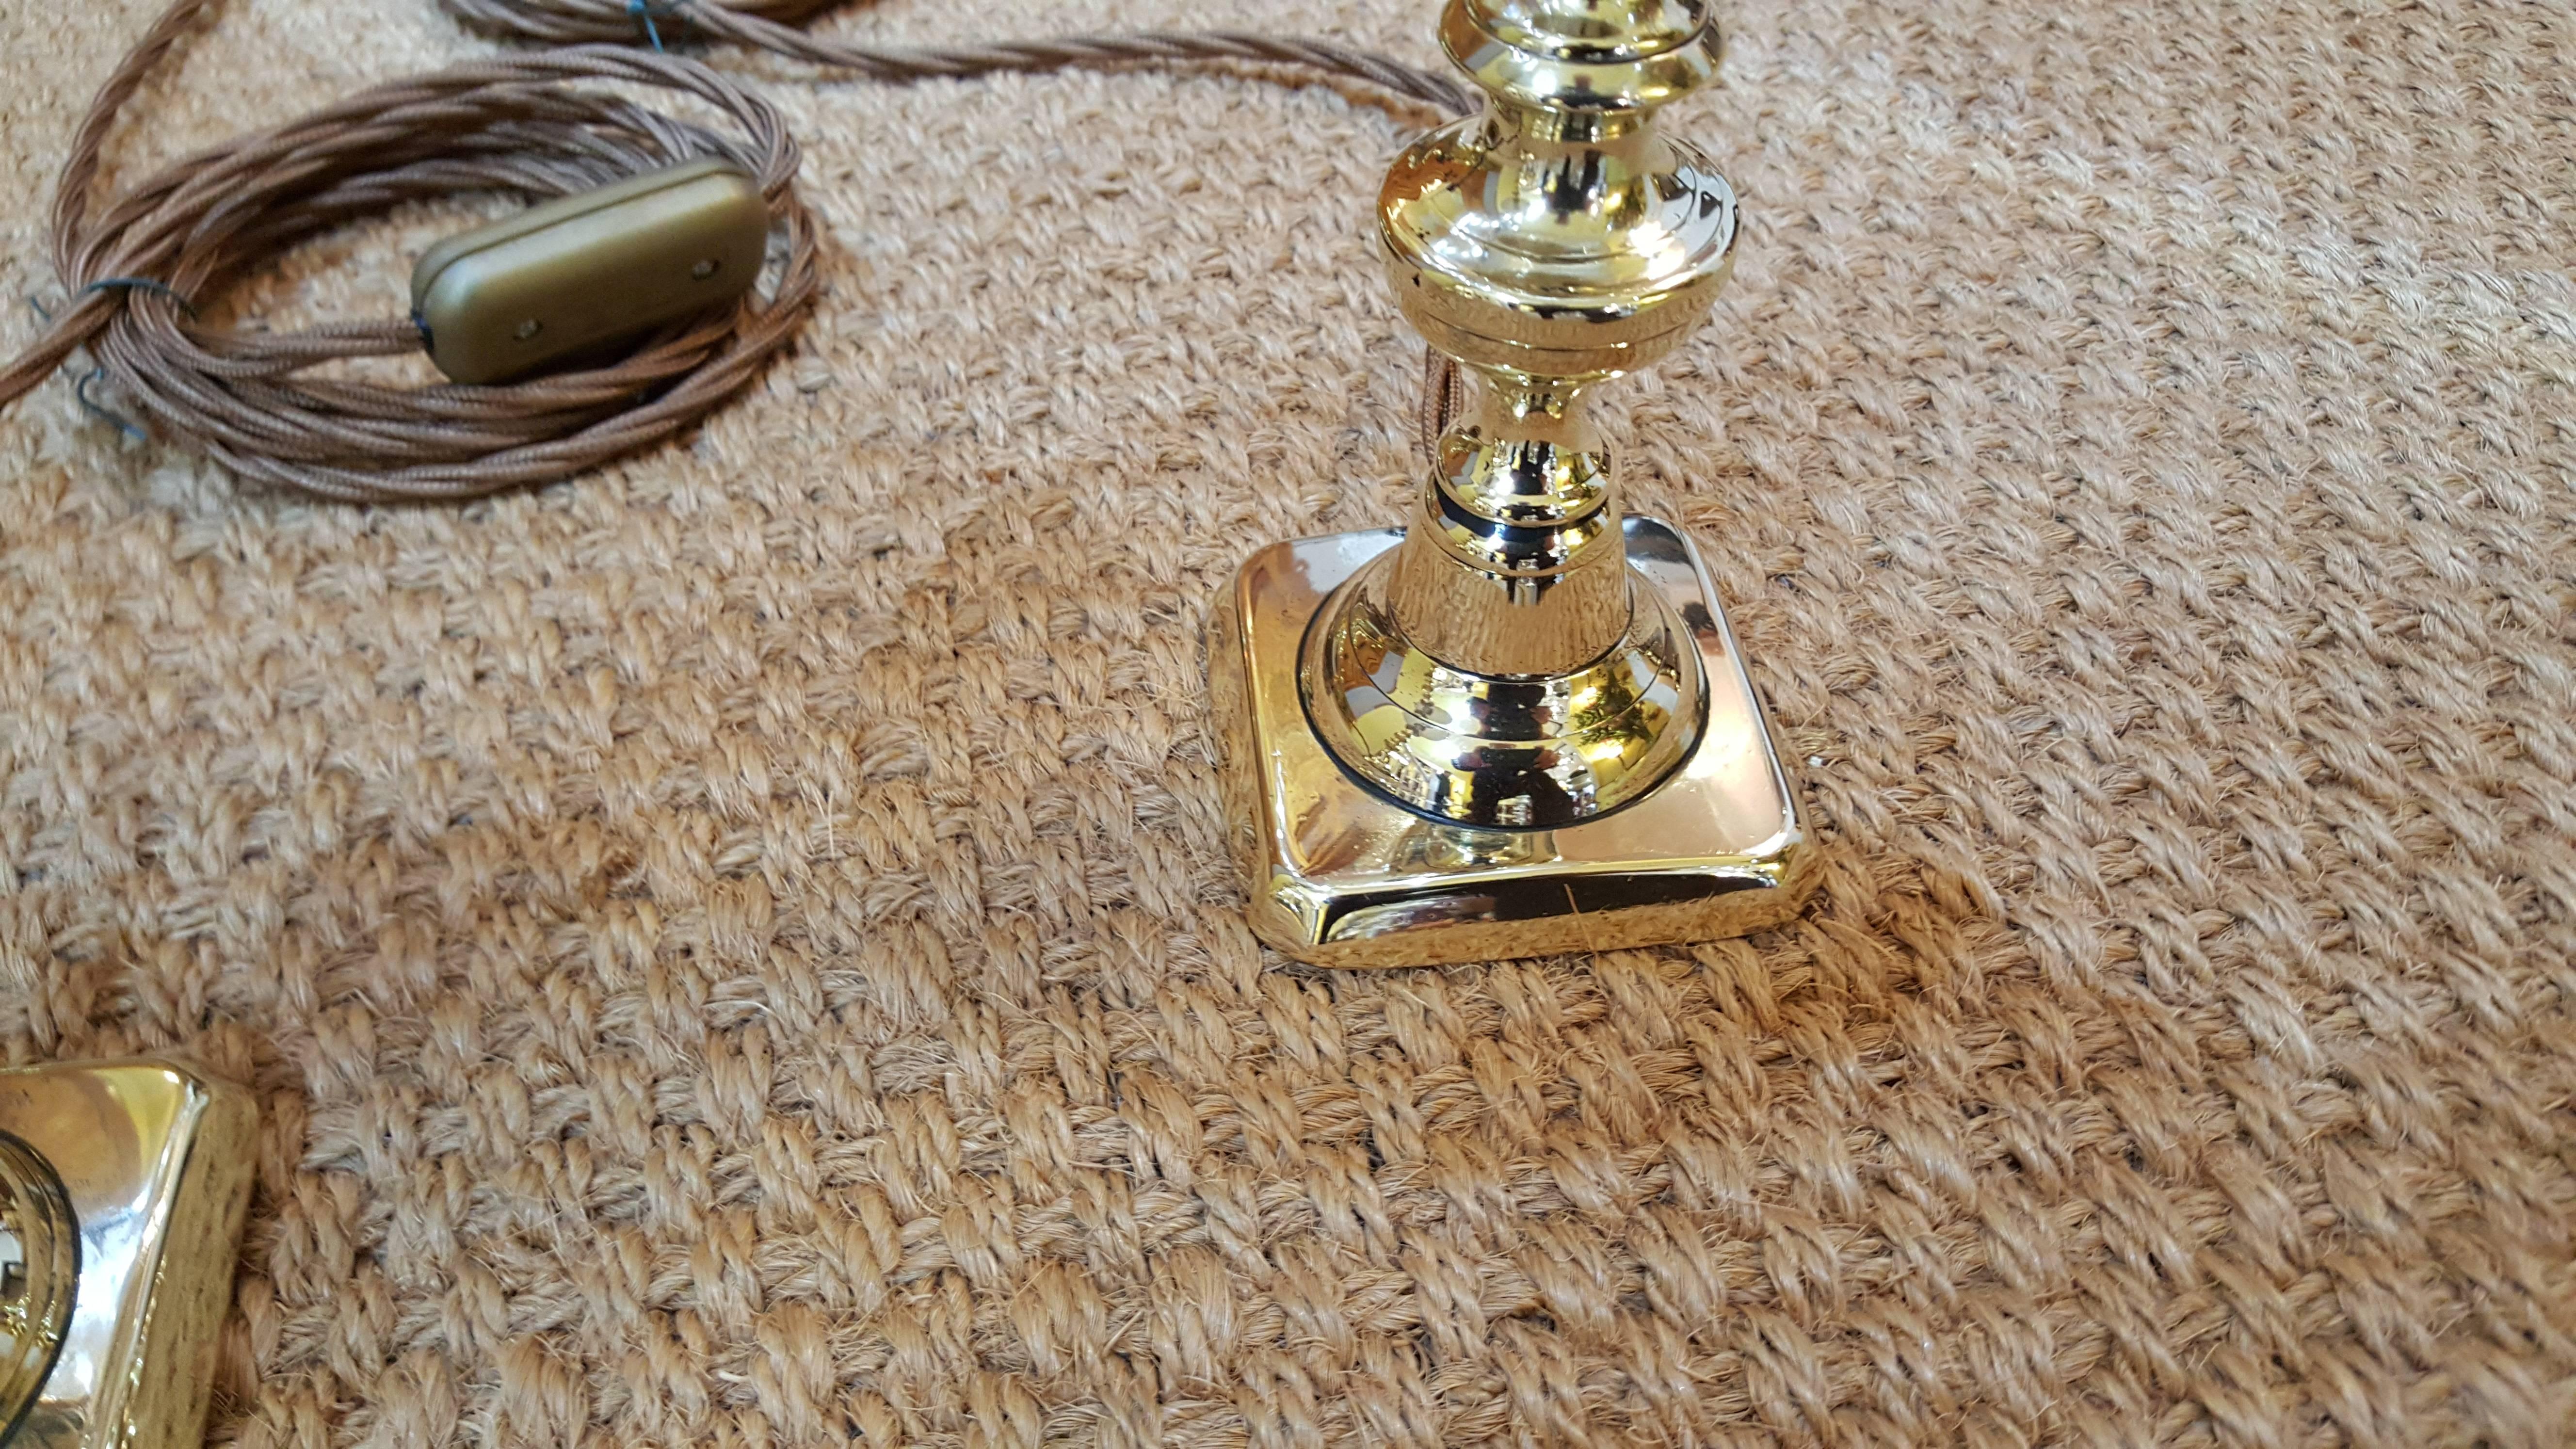 Pair of Edwardian brass candlesticks converted to electric table lights - all lights and lamps have been rewired with authentic corded flex, fitted with either foot switch or finger clicker switch and are Pat tested -
Measure: 6